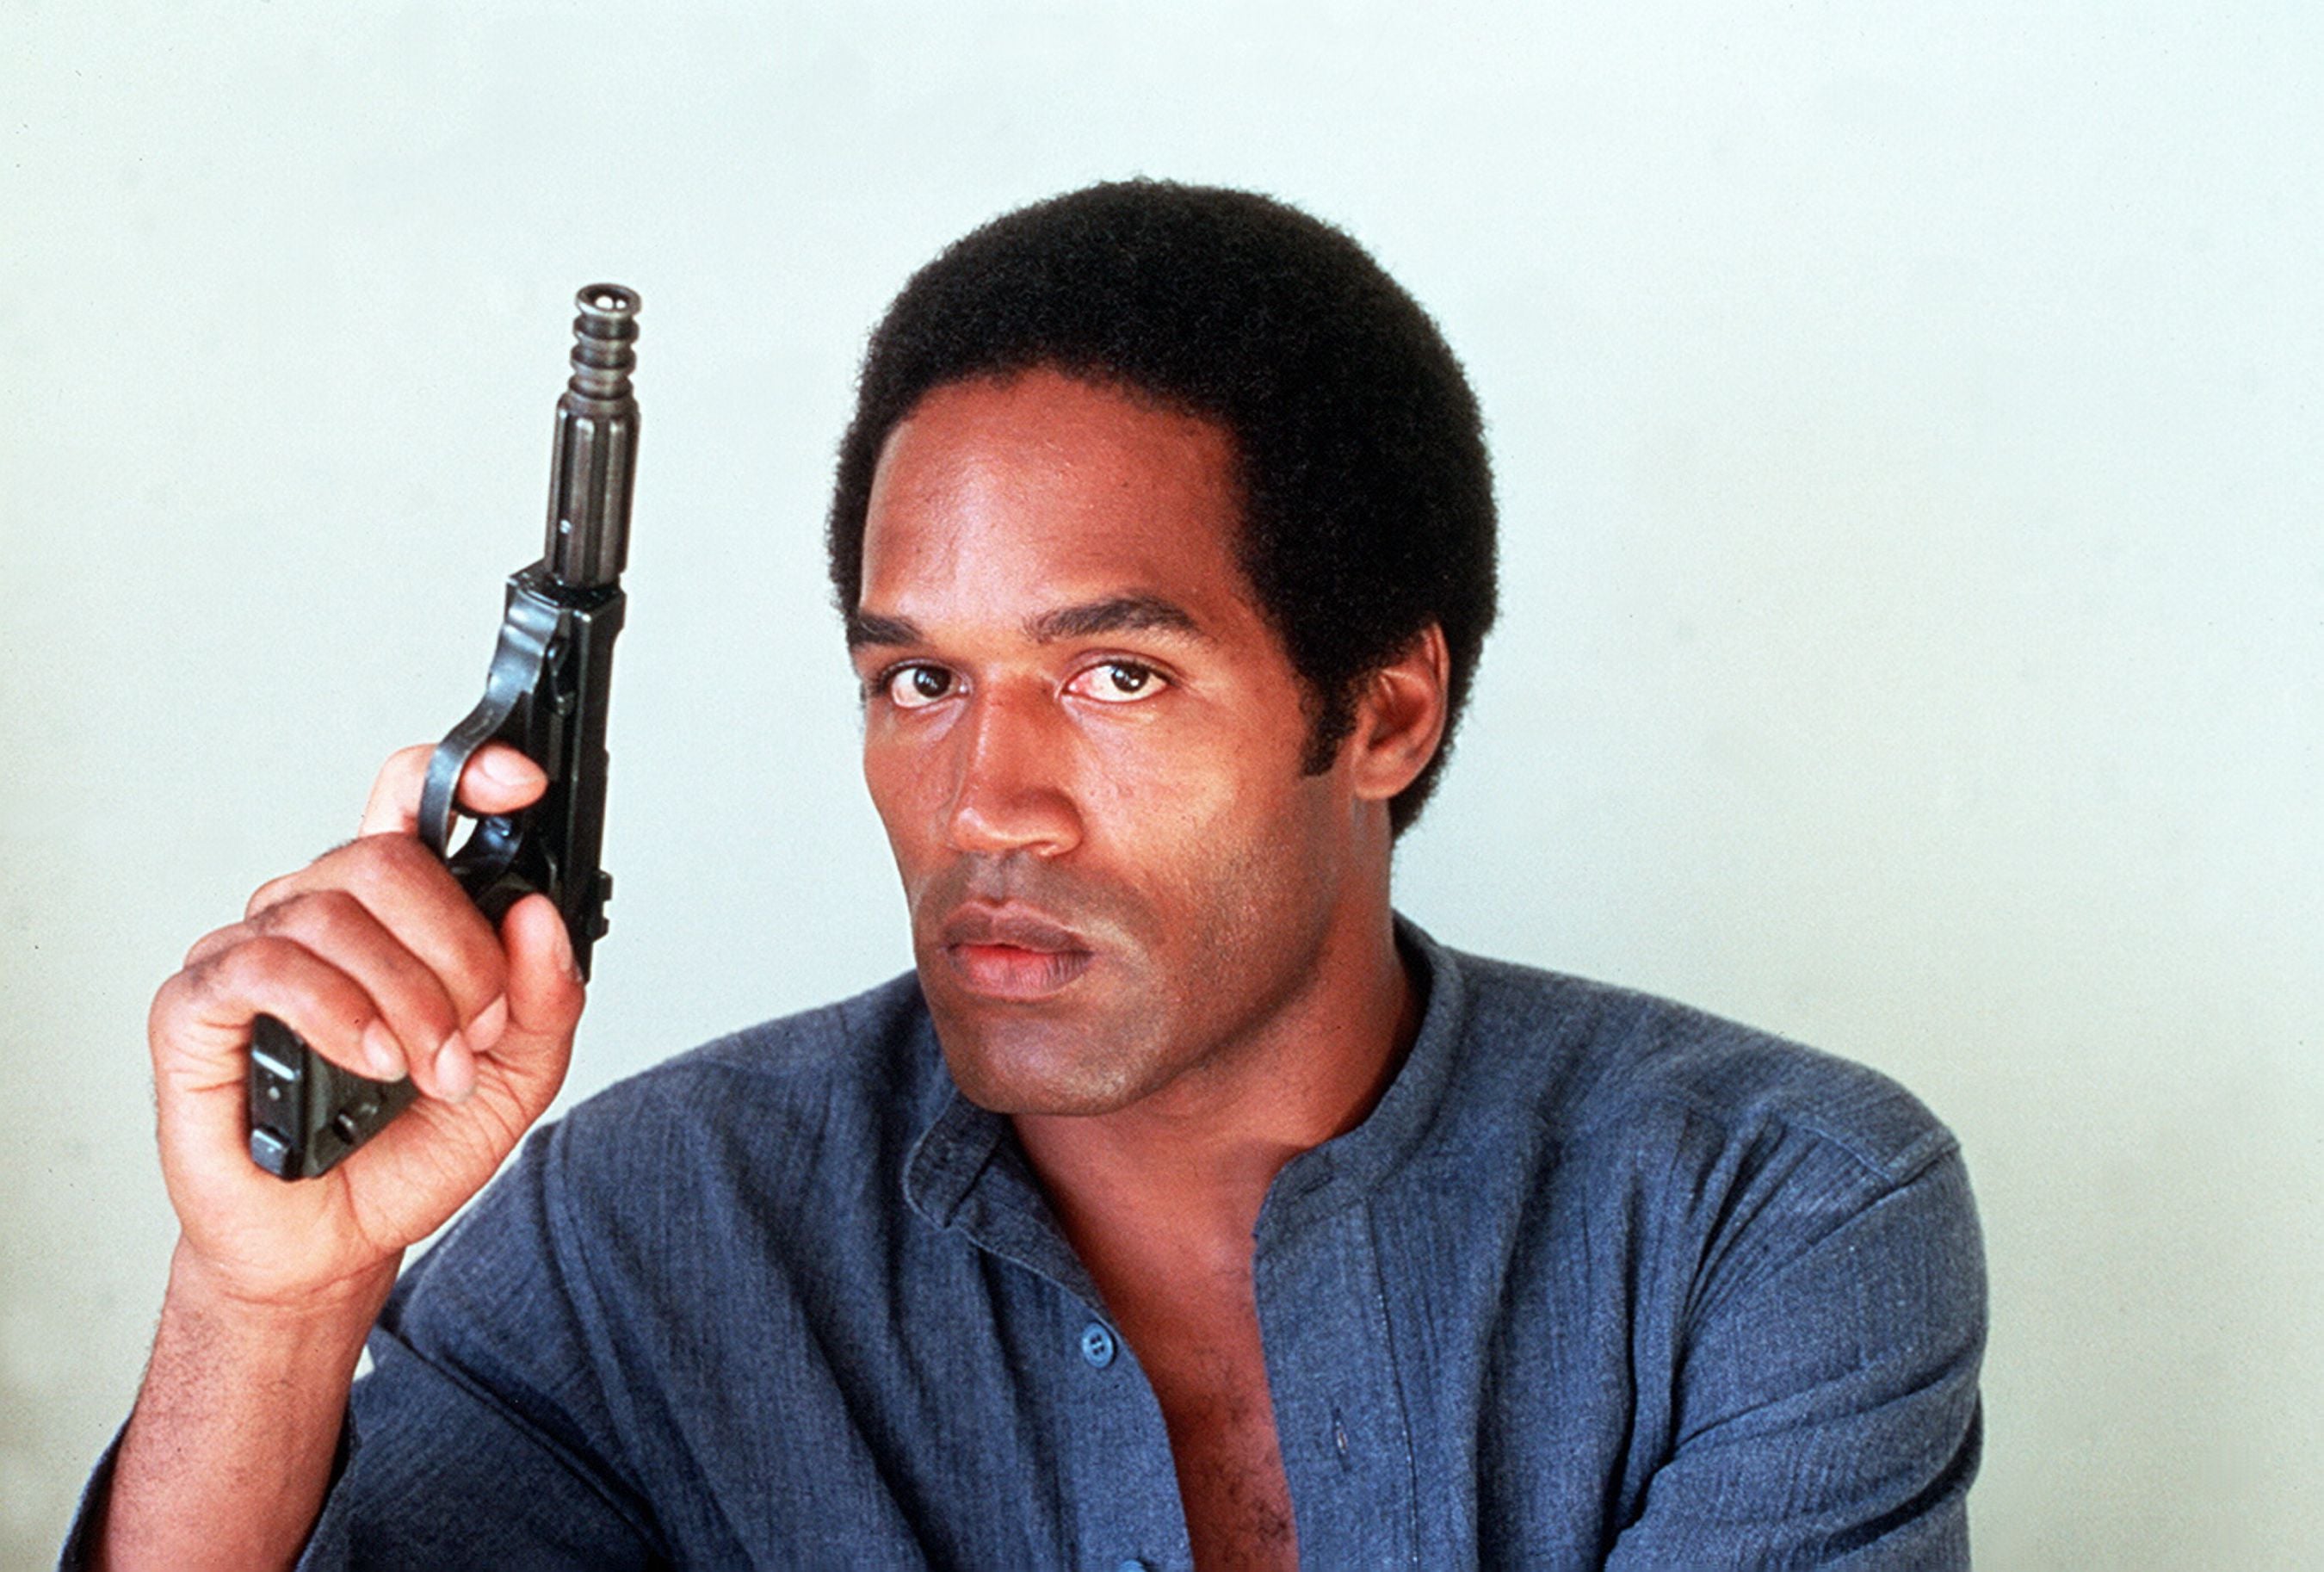 OJ Simpson poses for a promotional photo for ‘Firepower’ in 1979